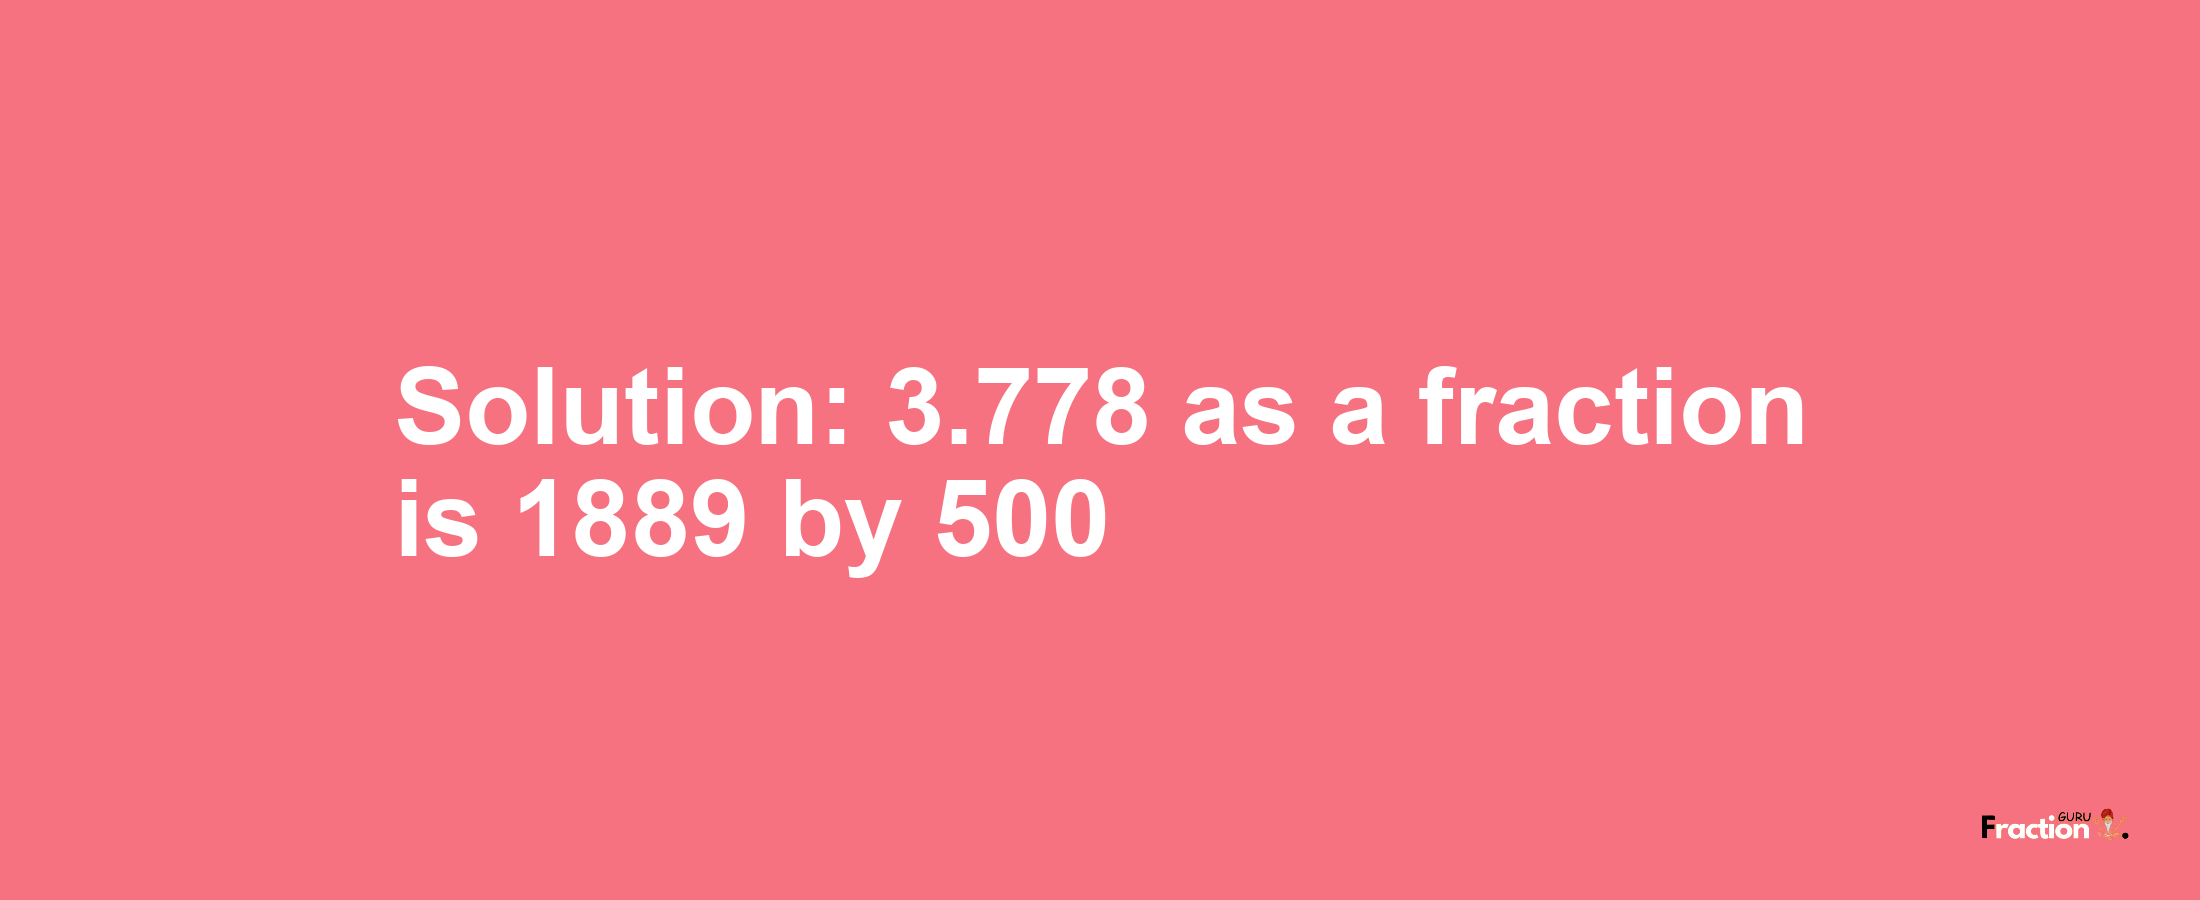 Solution:3.778 as a fraction is 1889/500